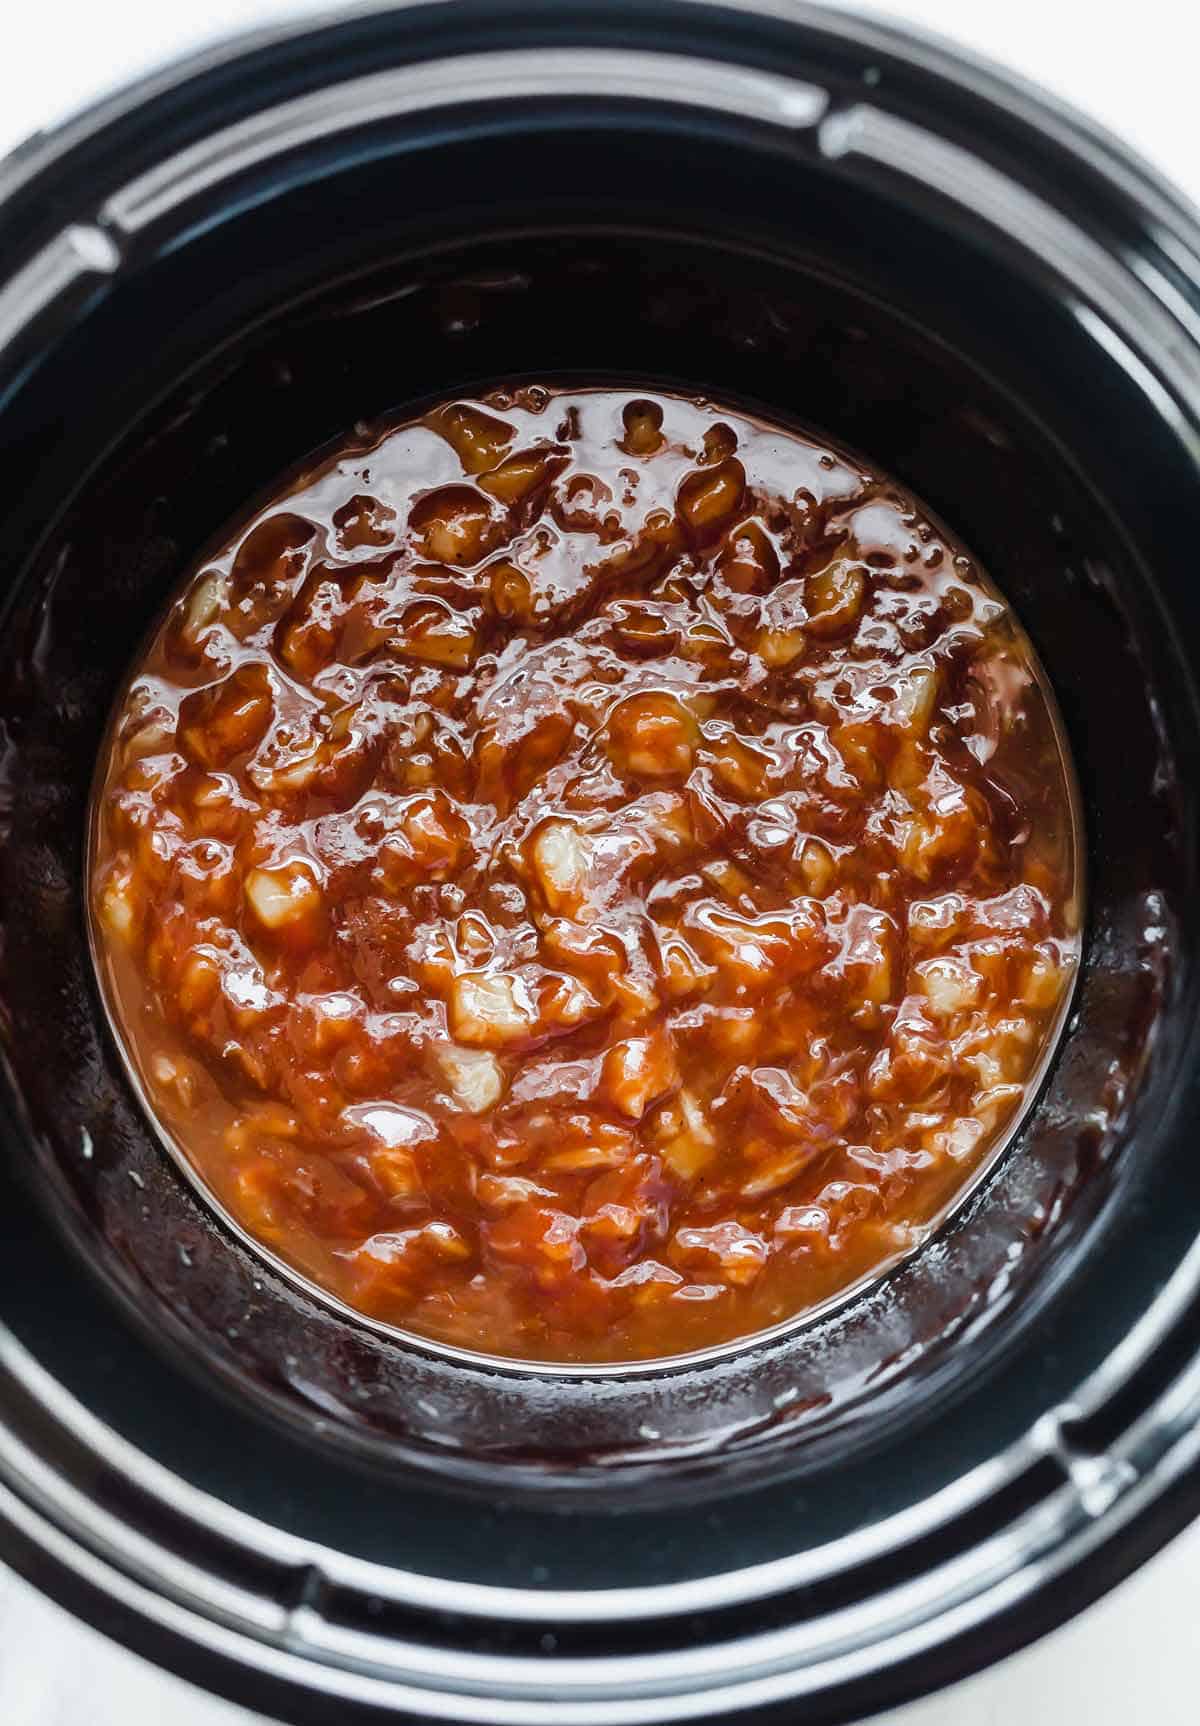 BBQ sauce and crushed pineapple in a black round crockpot.